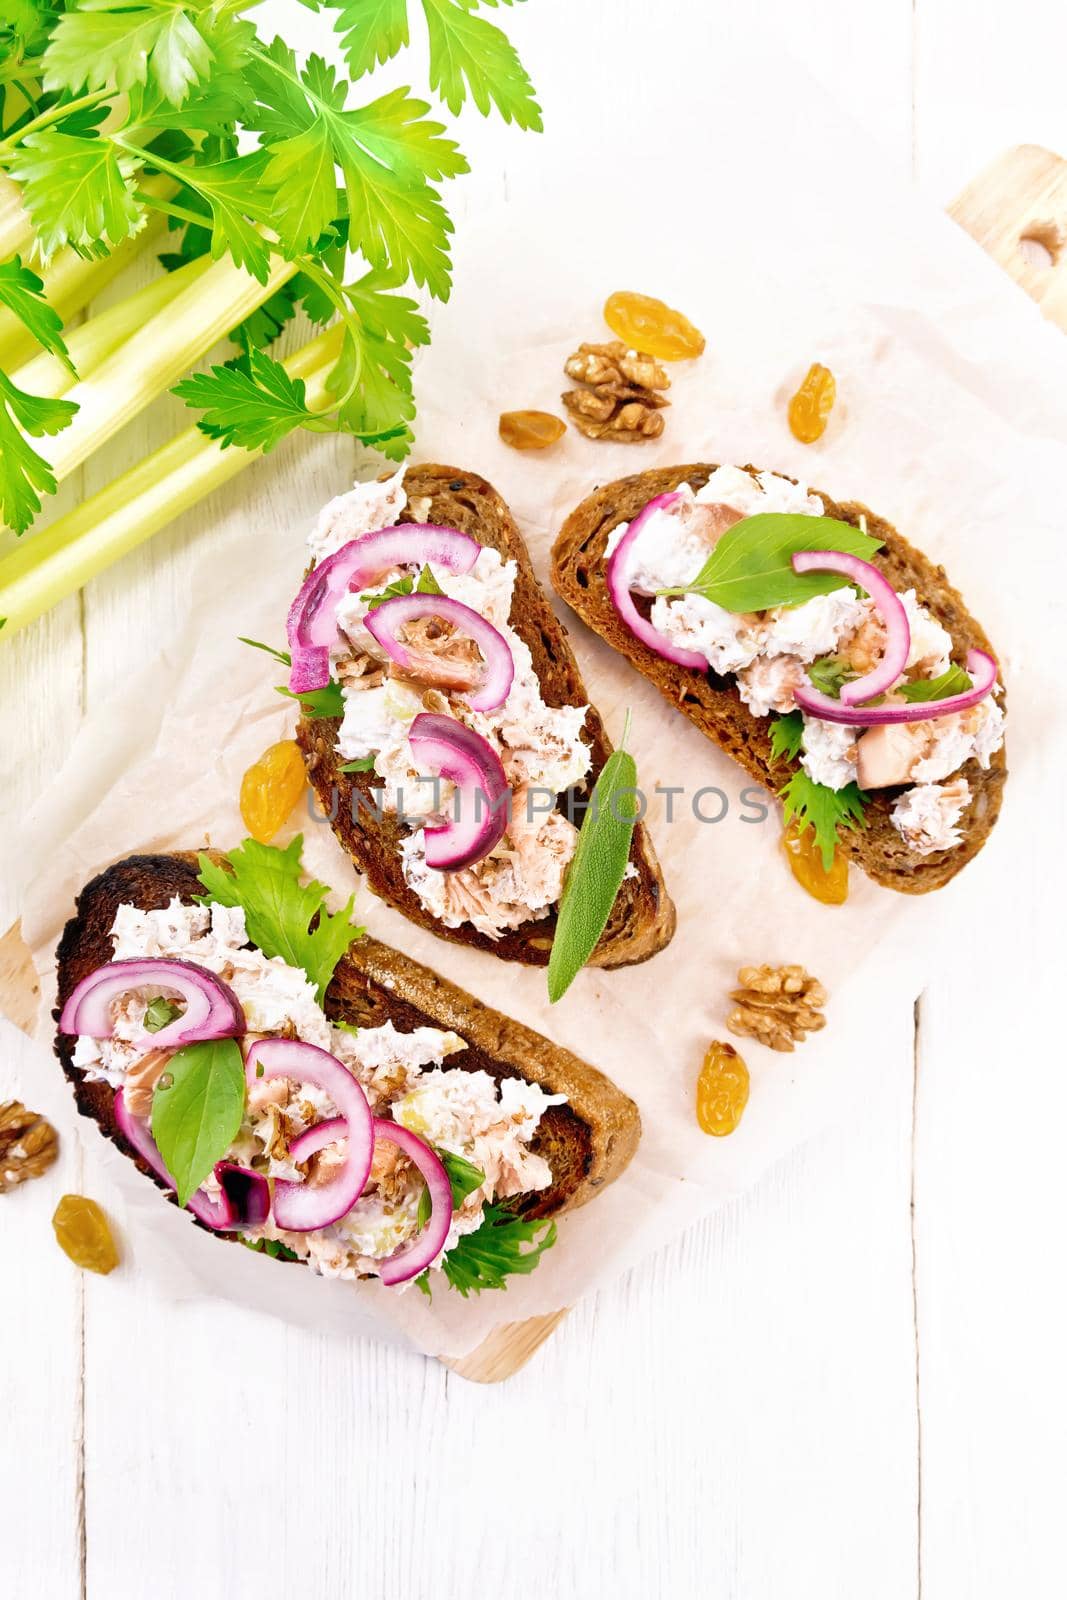 Salmon, petiole celery, raisins, walnuts, red onions and curd cheese salad on toasted bread with green lettuce on paper on a light wooden board background from above